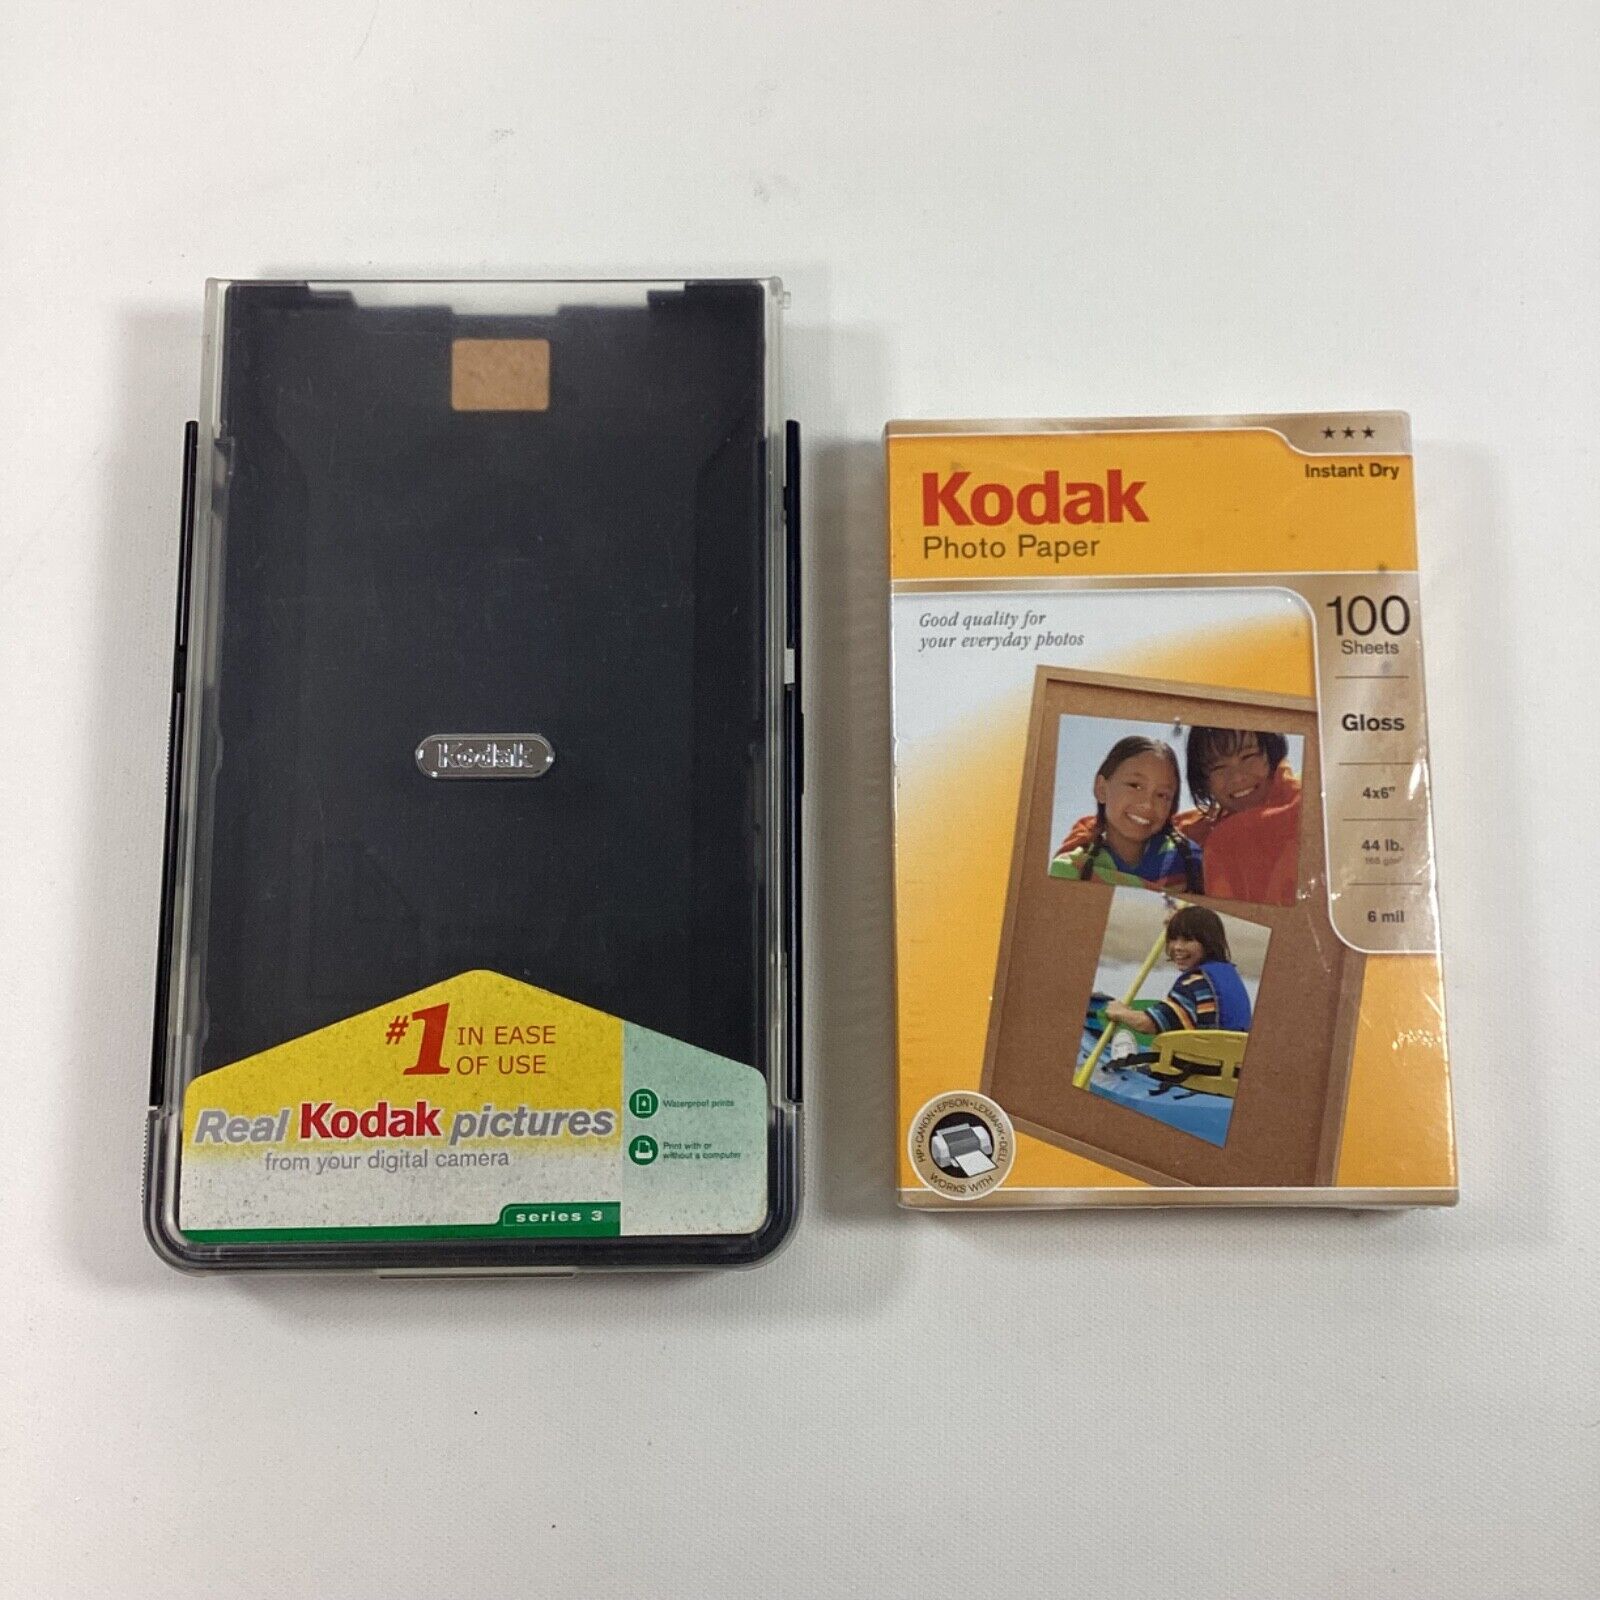 Kodak EasyShare Series 3 Replacement Printer Dock Paper Tray With Photo Paper